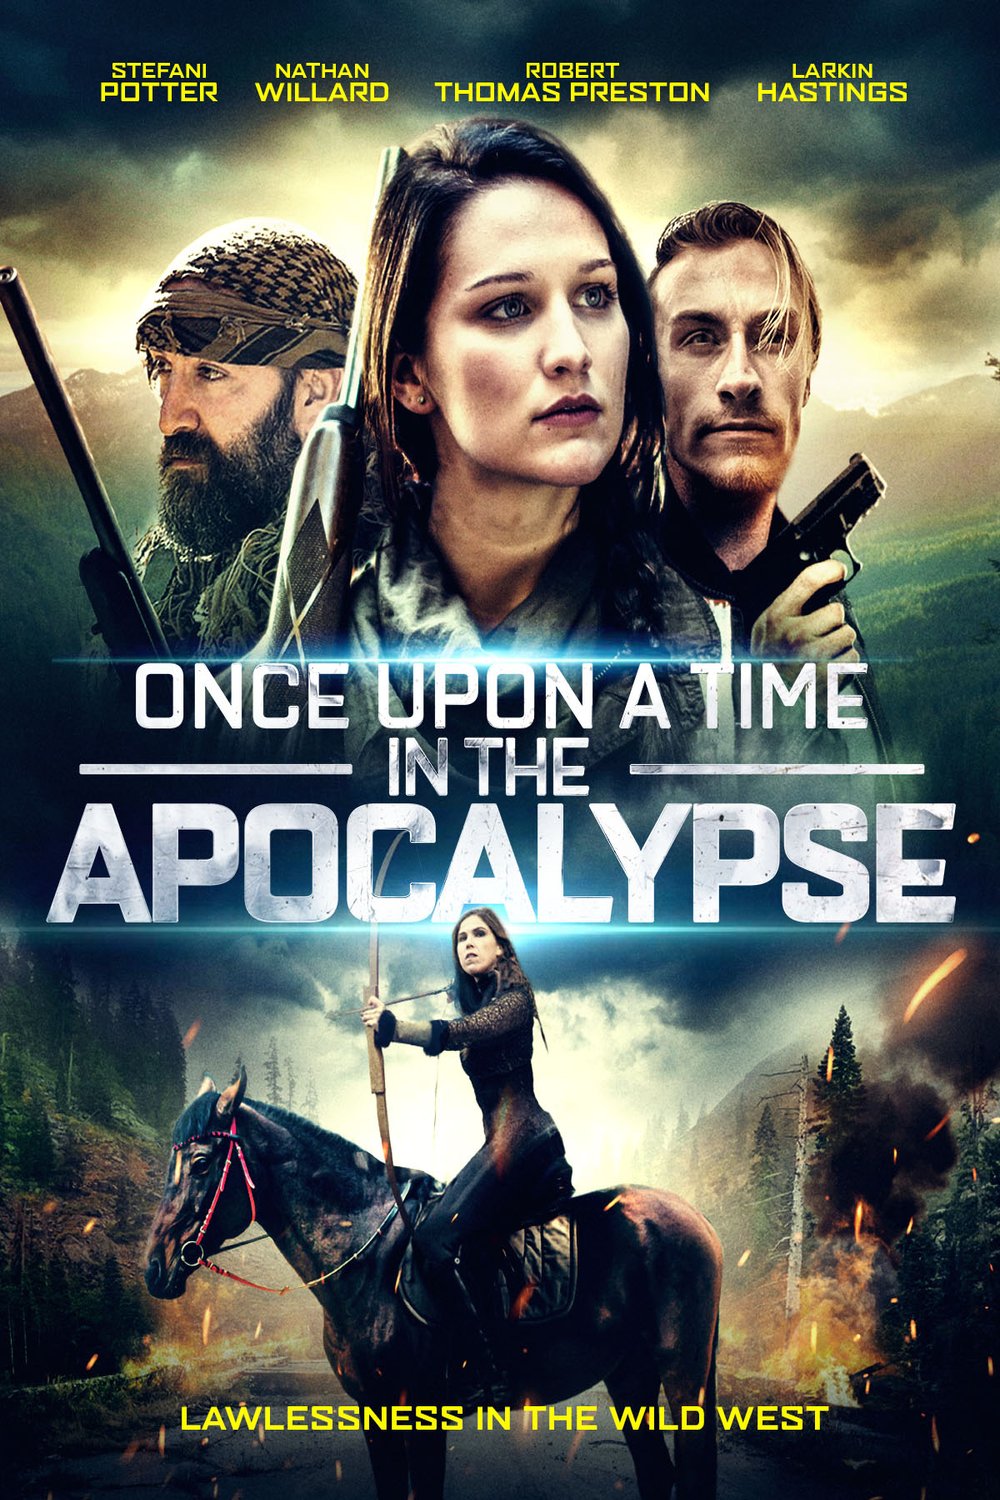 L'affiche du film Once Upon a Time in the Apocalypse